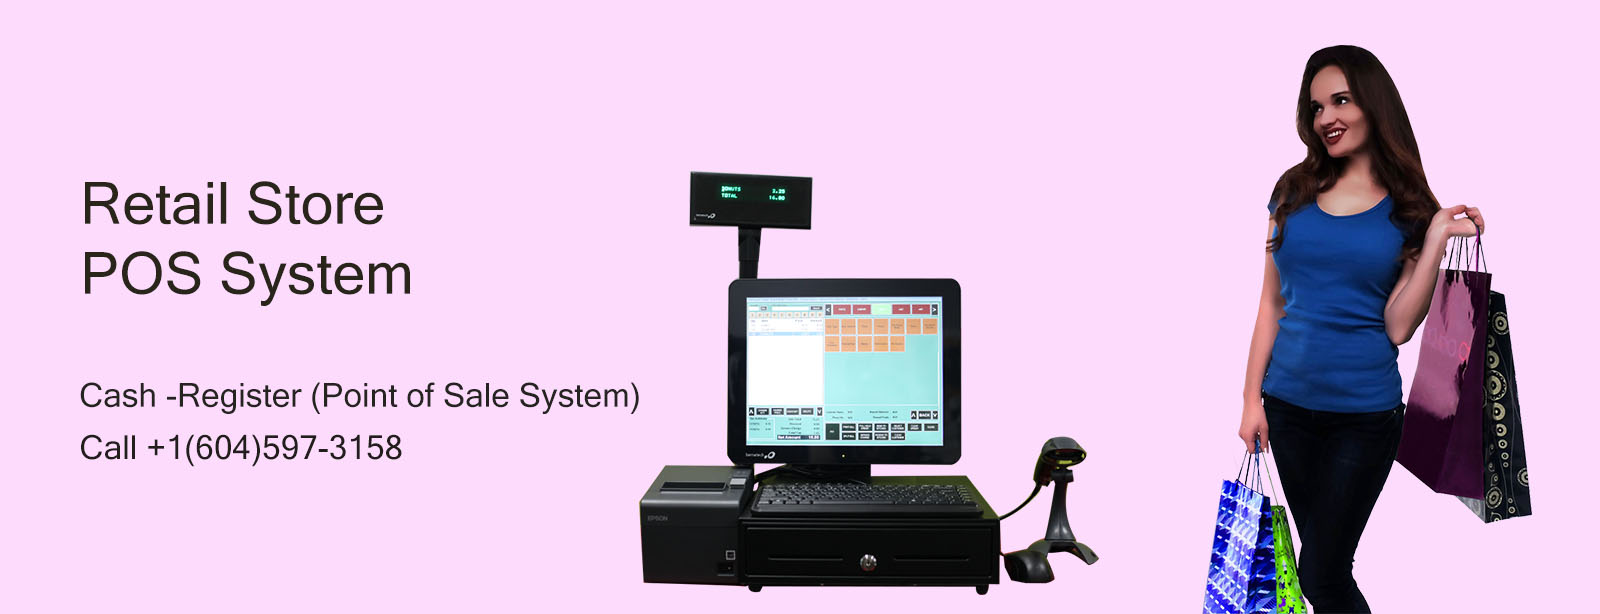 Clothing/Retail POS System, Cash Register, Point of Sale System